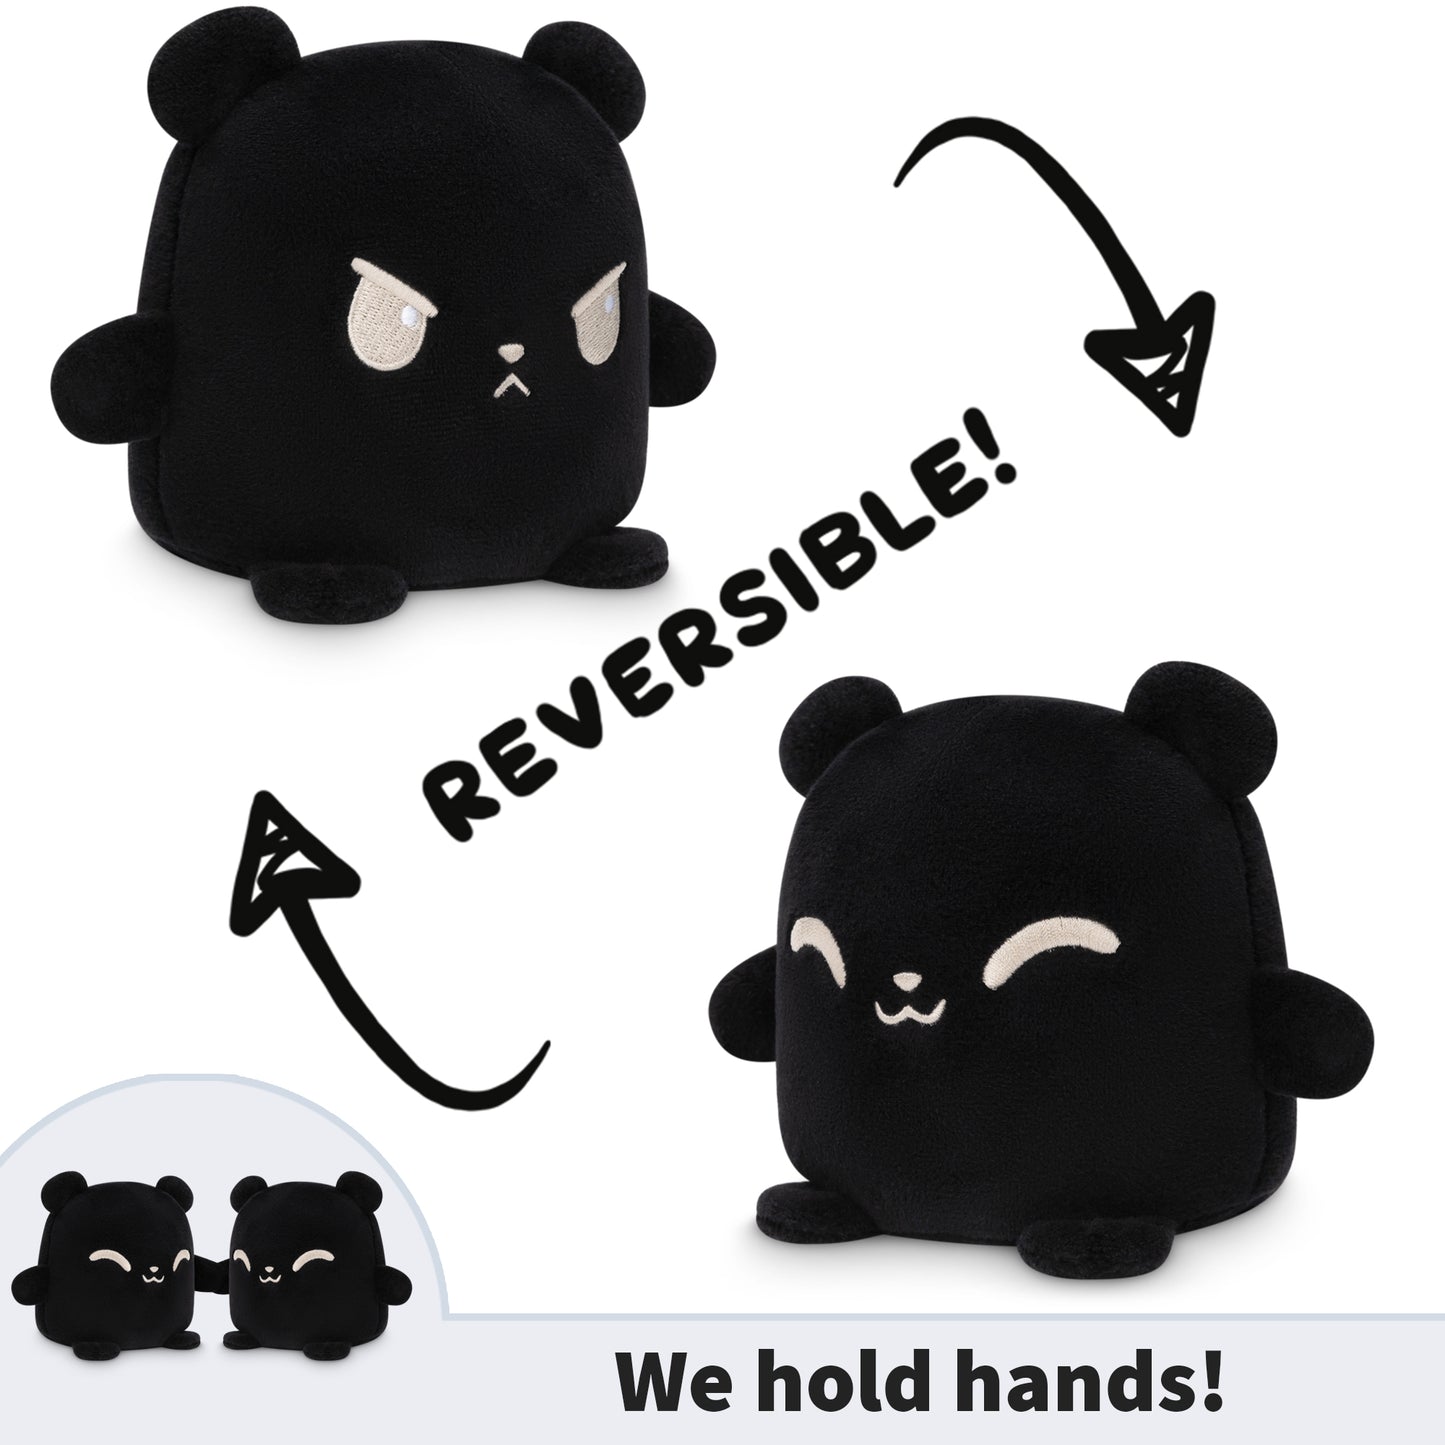 Two TeeTurtle Reversible Bear Plushmates (Black) that hold hands, available from TeeTurtle.